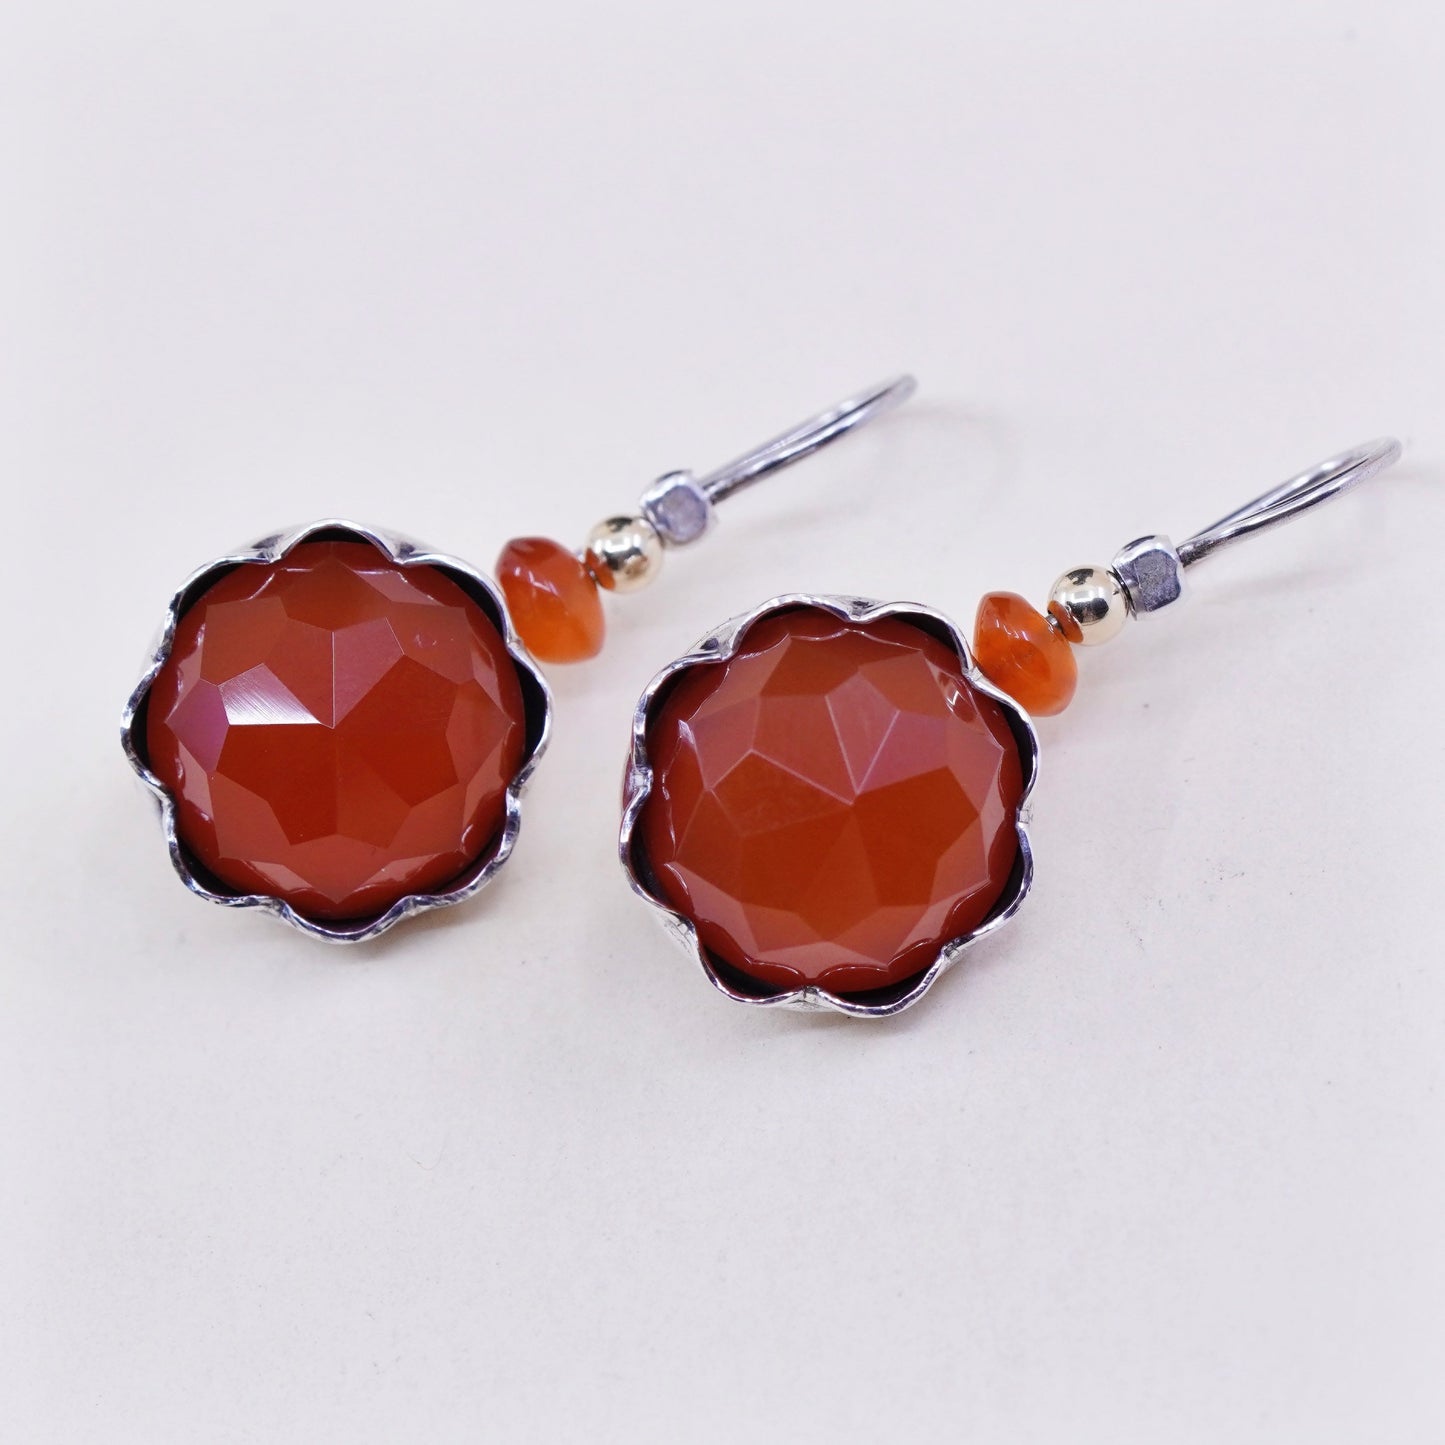 Israel Silpada 14K gold bead with Sterling 925 Silver earrings and carnelian